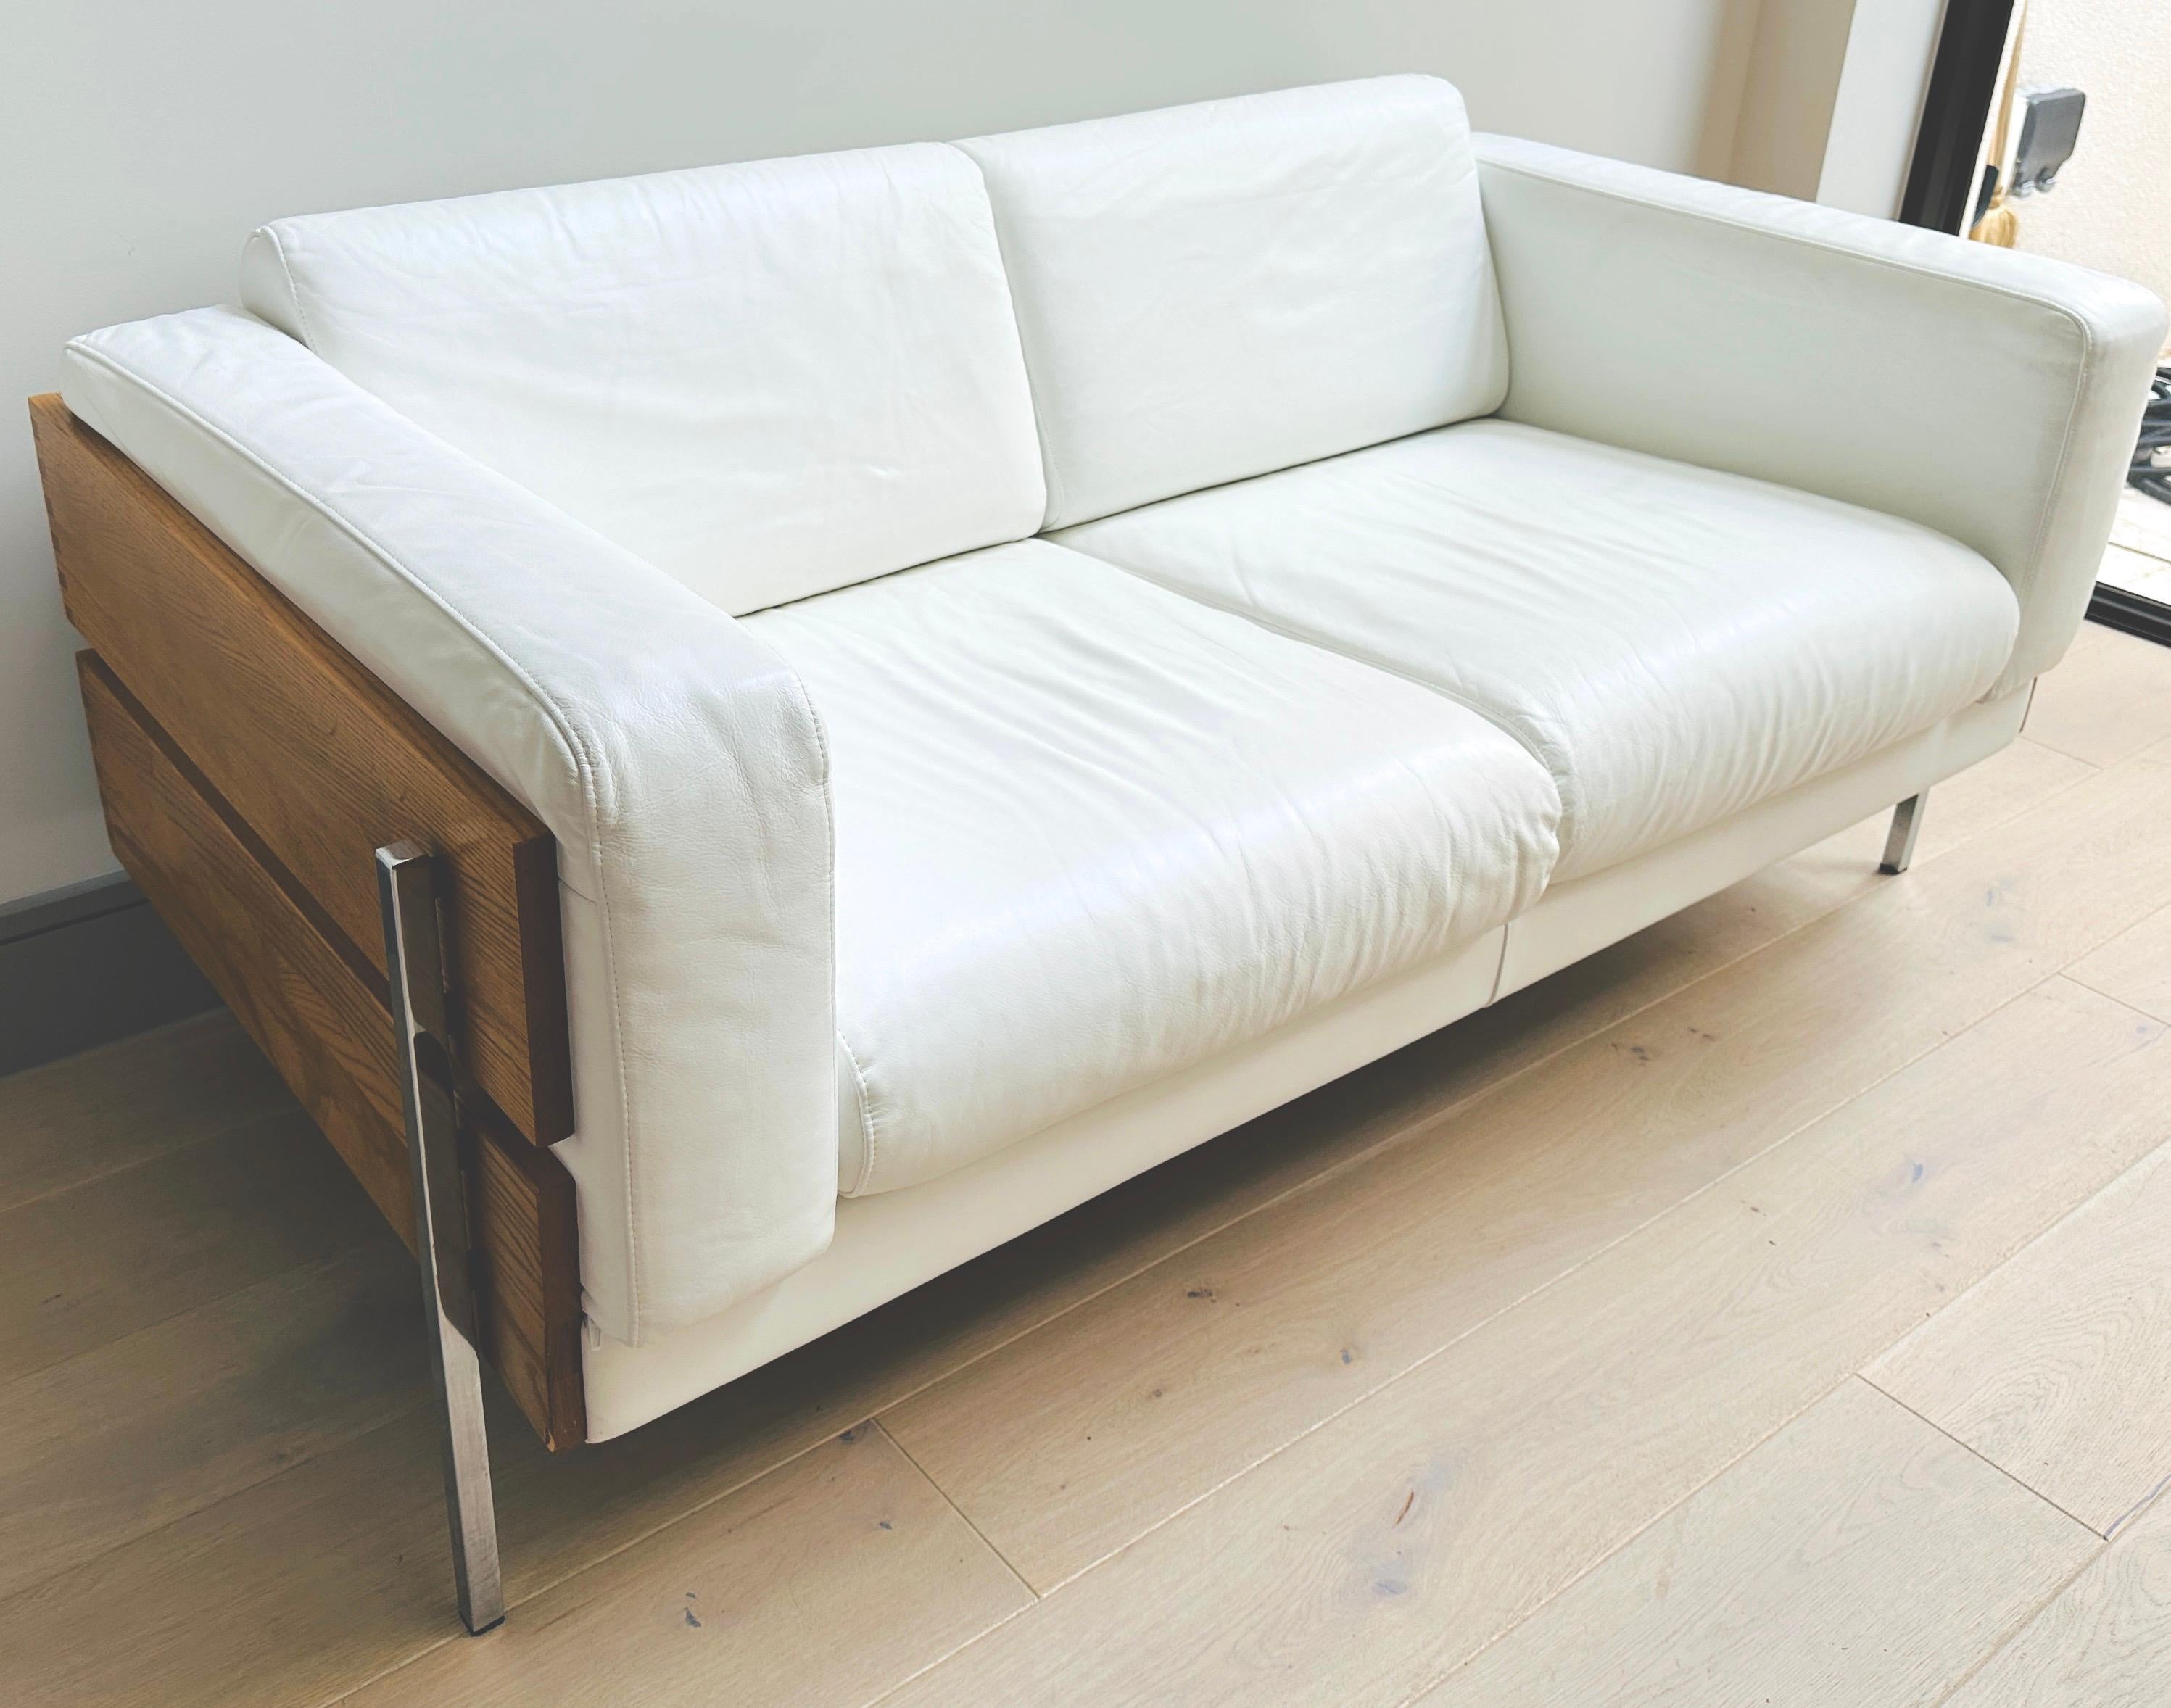 A classic and iconic 'Forum II' two-seater sofa designed by Robin Day for Hille. Originally designed in 1964 and later licensed and manufactured by Habitat in the early 2000s.  

This version in soft and supple white leather with feature stitching